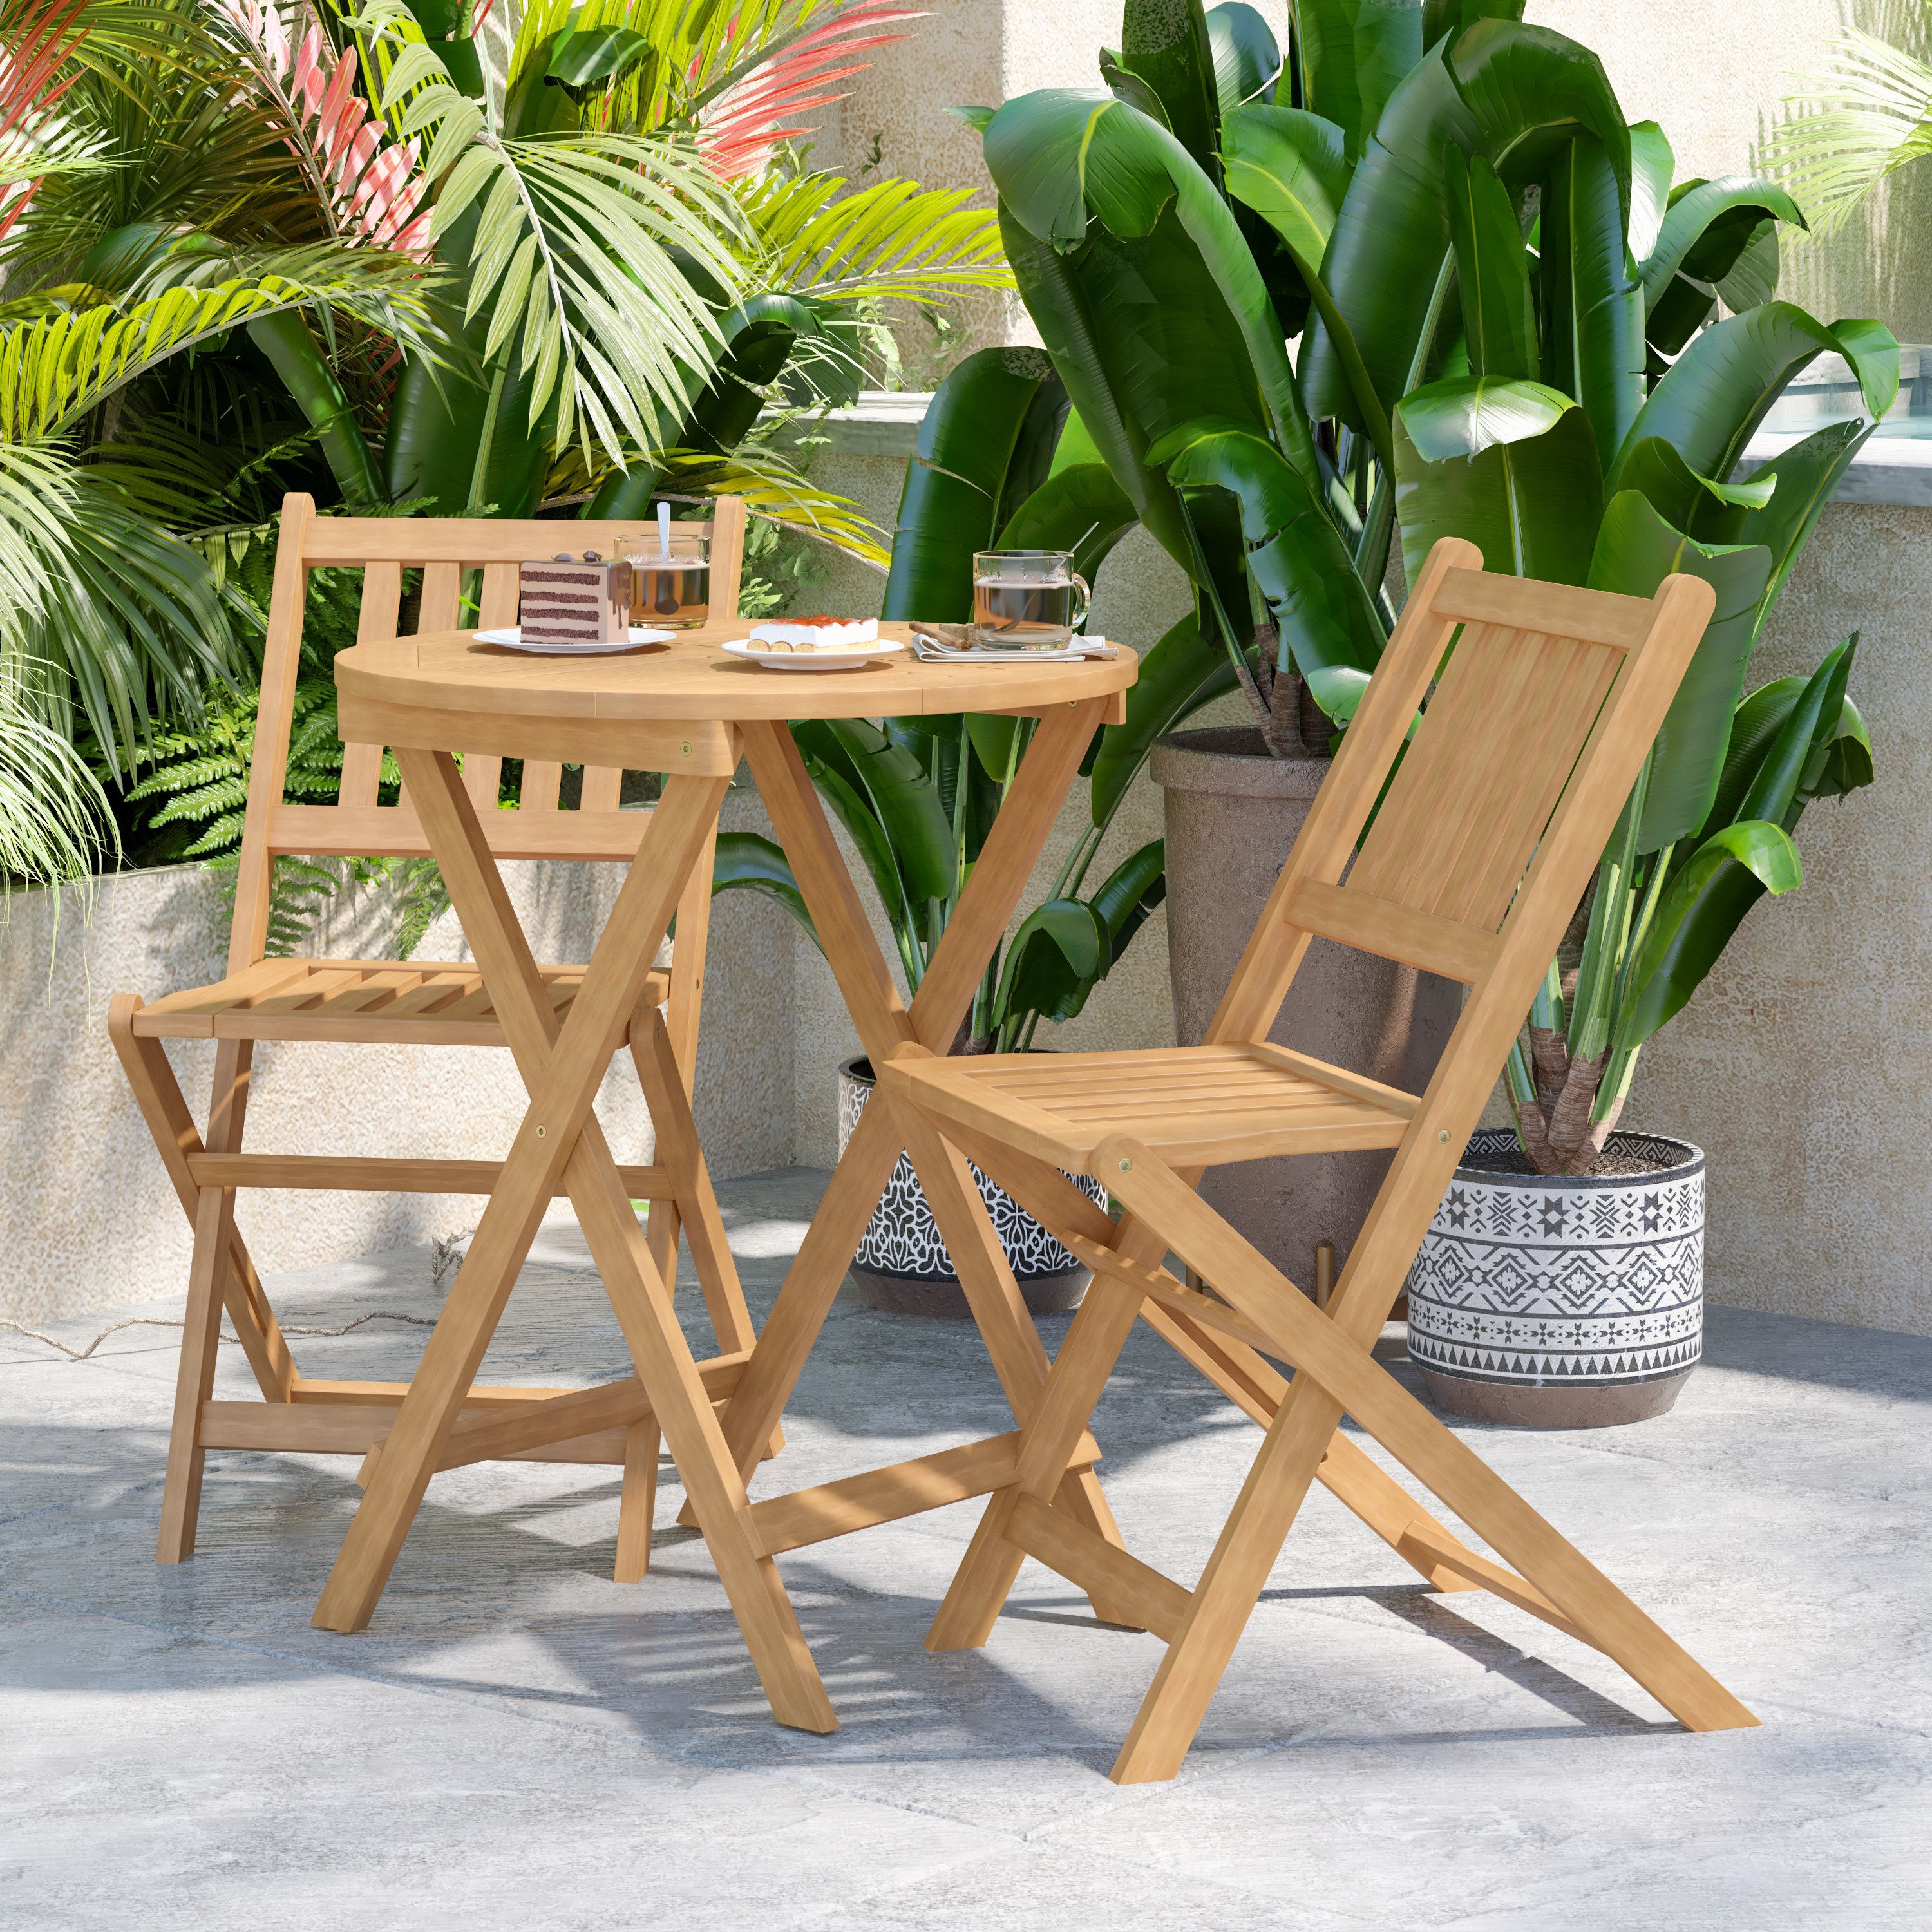 Most Popular Acacia Wood With Table Garden Wooden Furniture With Winston Porter Edil Indoor/outdoor Acacia Wood Folding Table And 2 Chair  Bistro Set & Reviews (Photo 6 of 15)